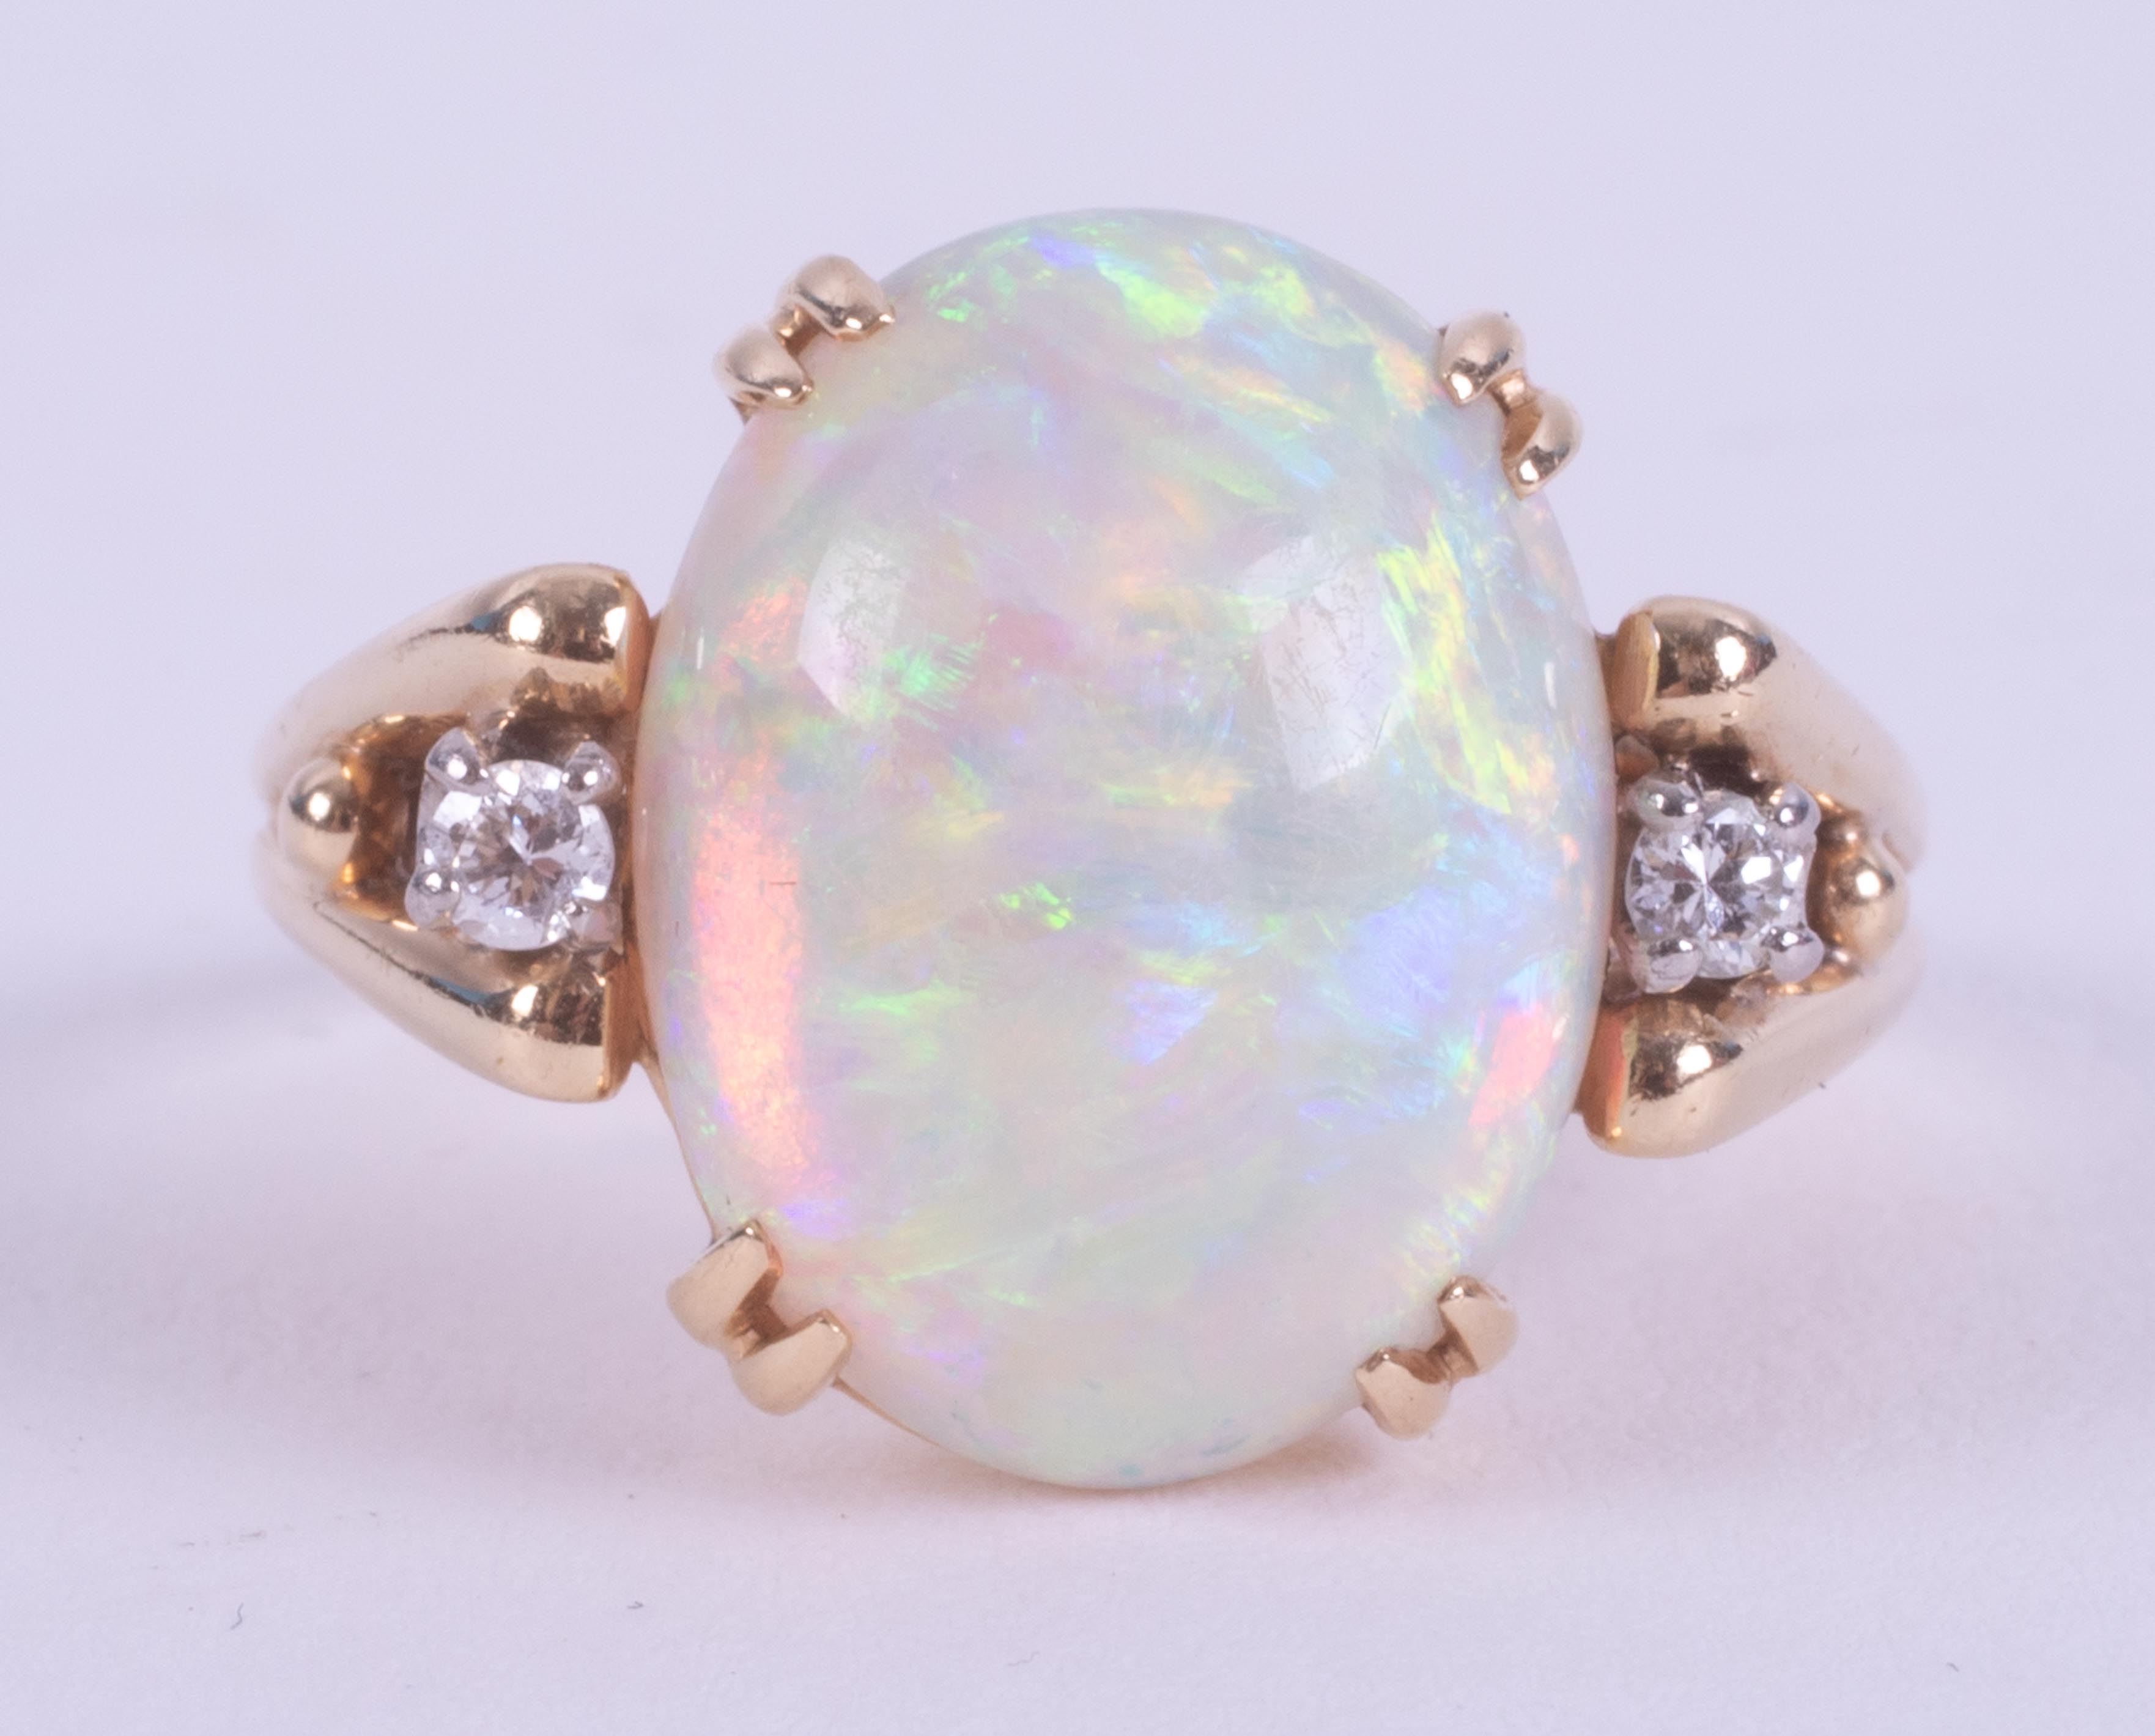 A 14ct yellow gold ring set with a central oval cabochon cut white opal, measuring approx. 15.9mm